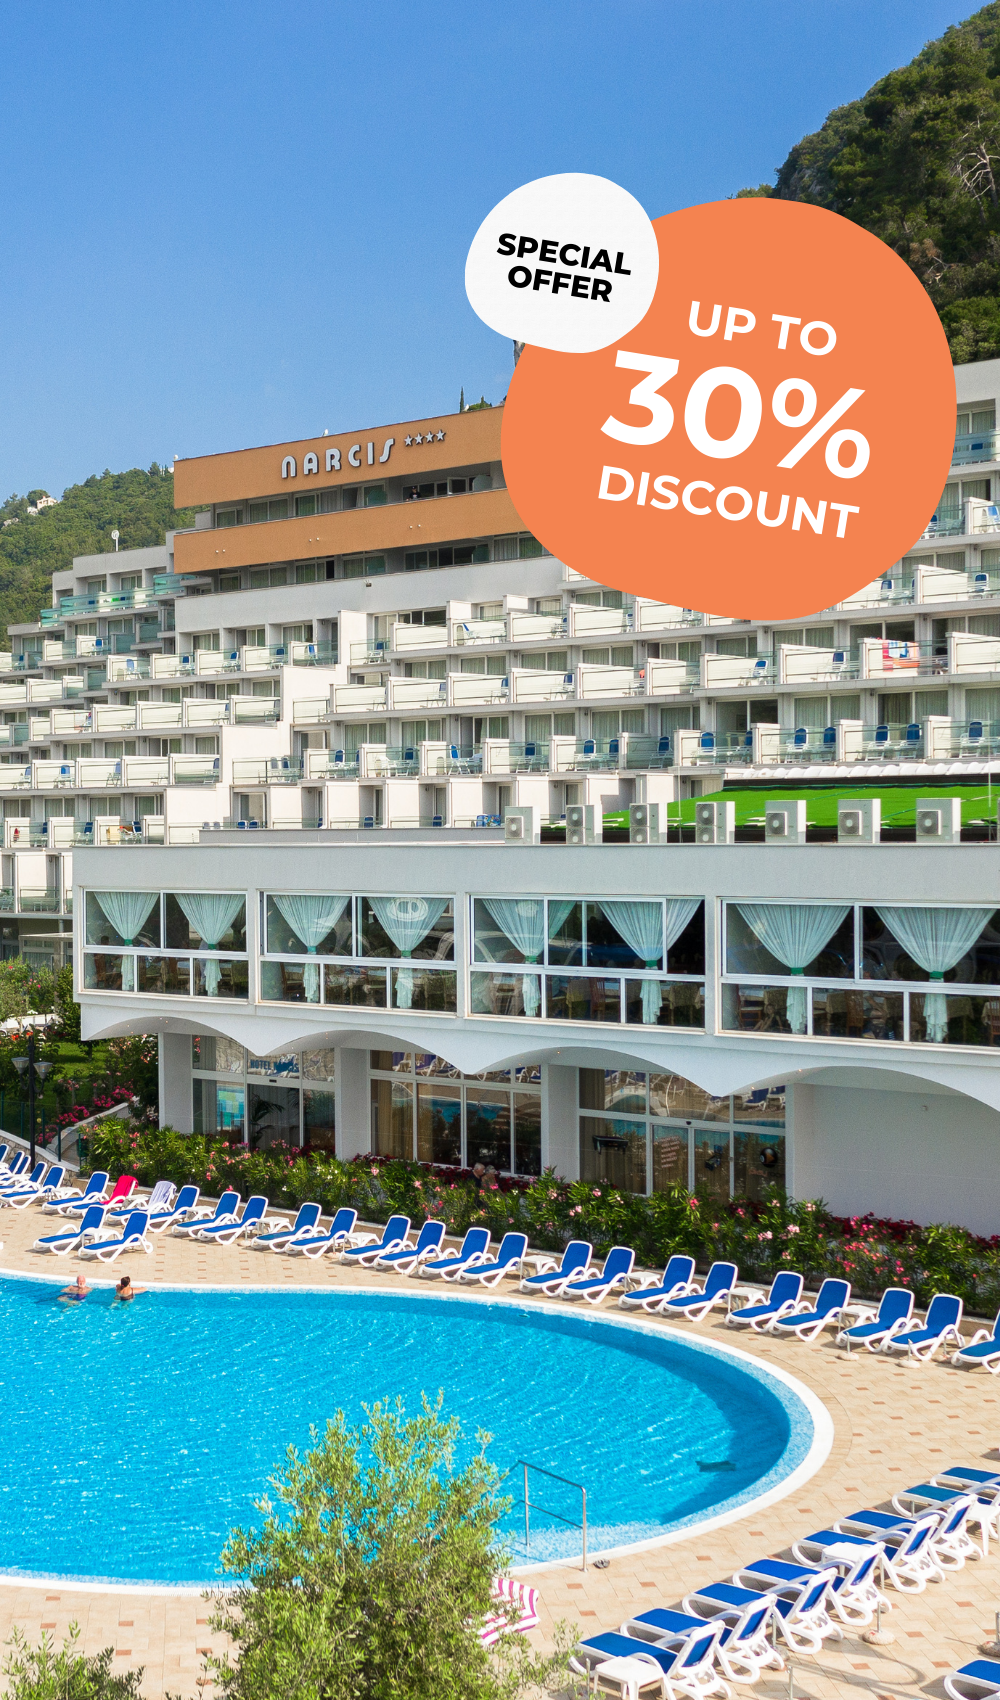 Narcis Hotel 4* is located in Rabac, a 5-minute walk from the beach, and offers an all-inclusive offer for a family, active, or sports vacation.